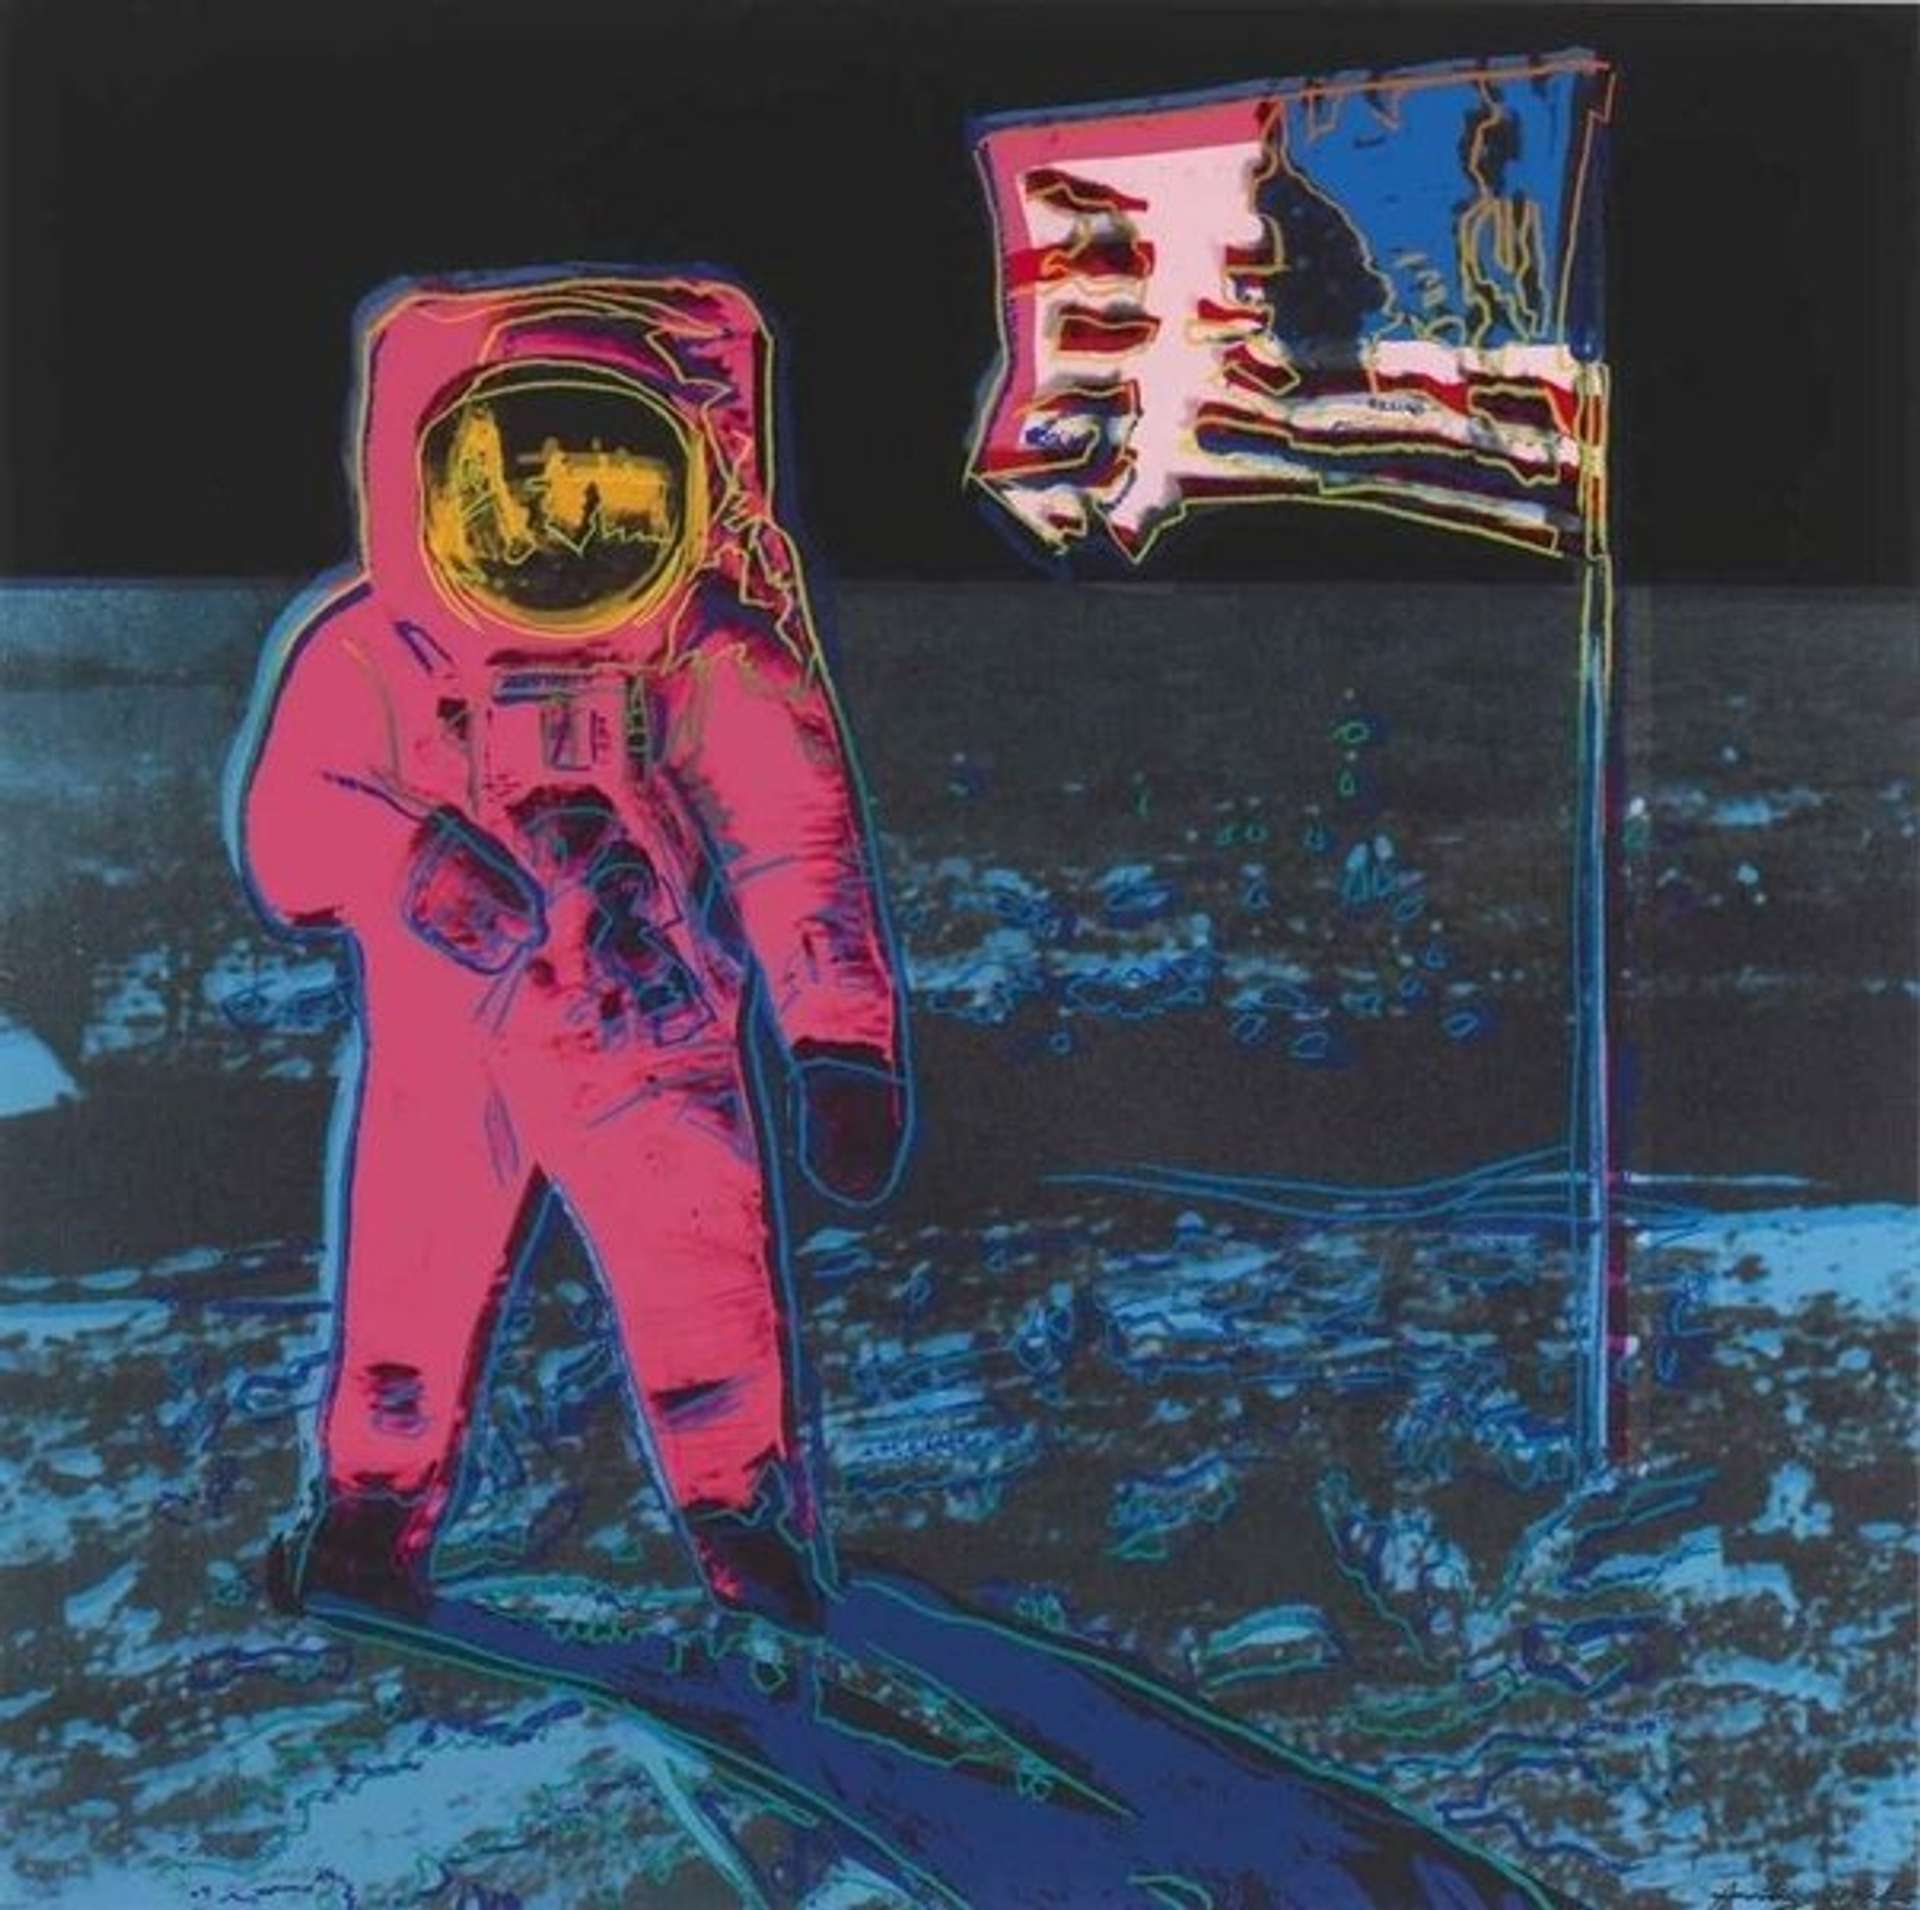 A screenprint of an astronaut wearing a white spacesuit on the moon's red surface. On the right side of the astronaut, an American flag is depicted, blowing to the left.